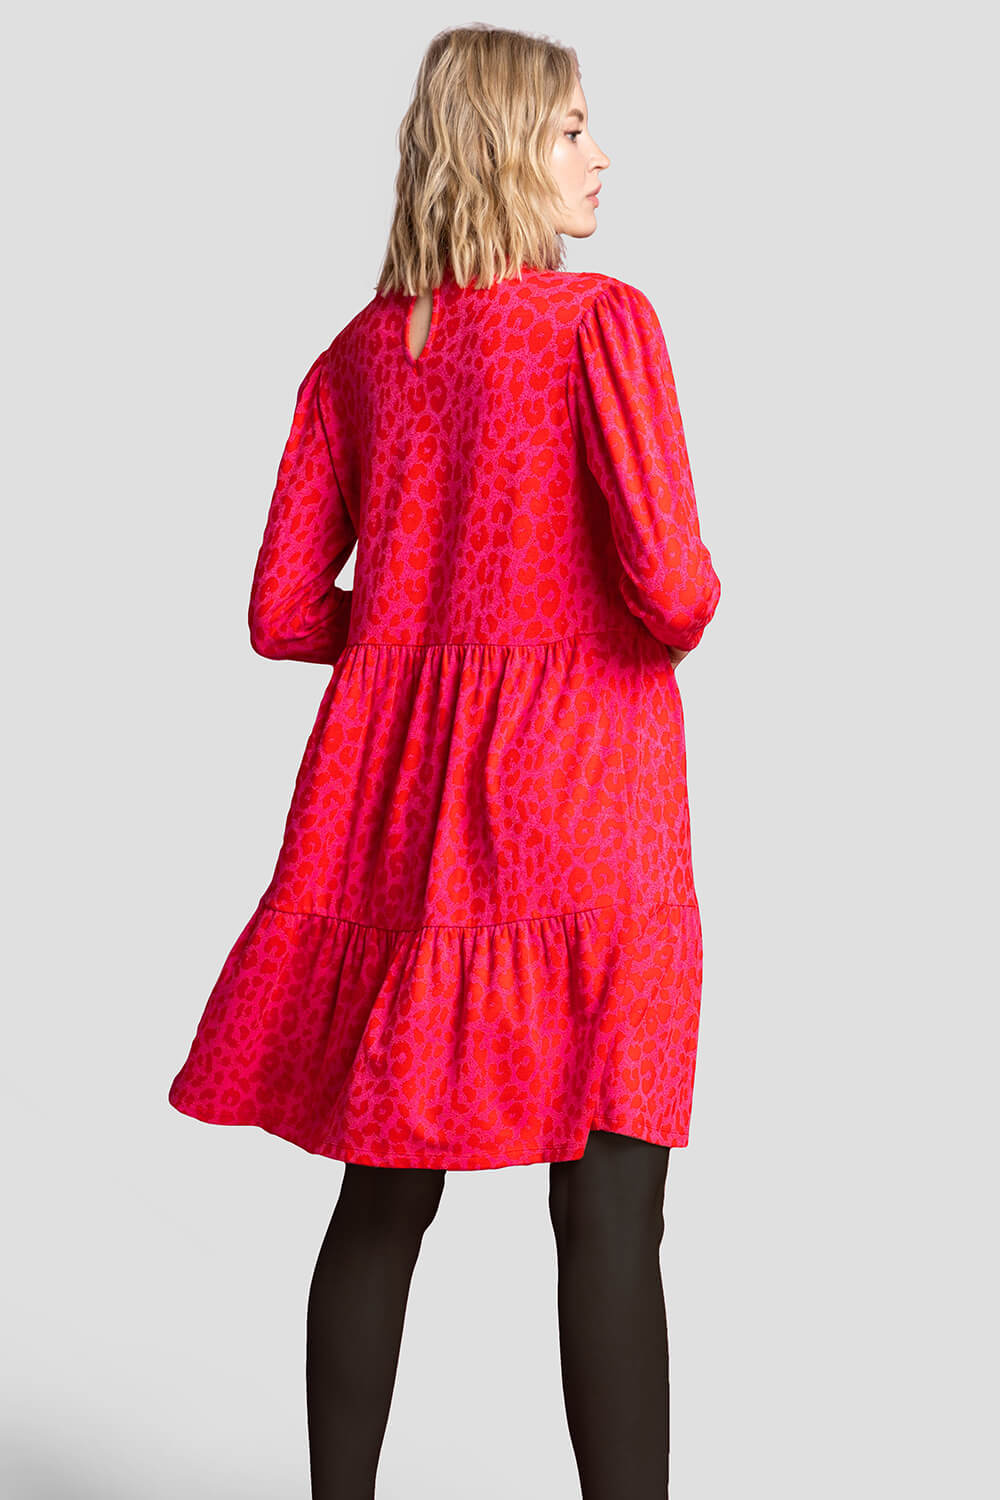 Red Jacquard Leopard Print Tiered Dress, Image 2 of 5